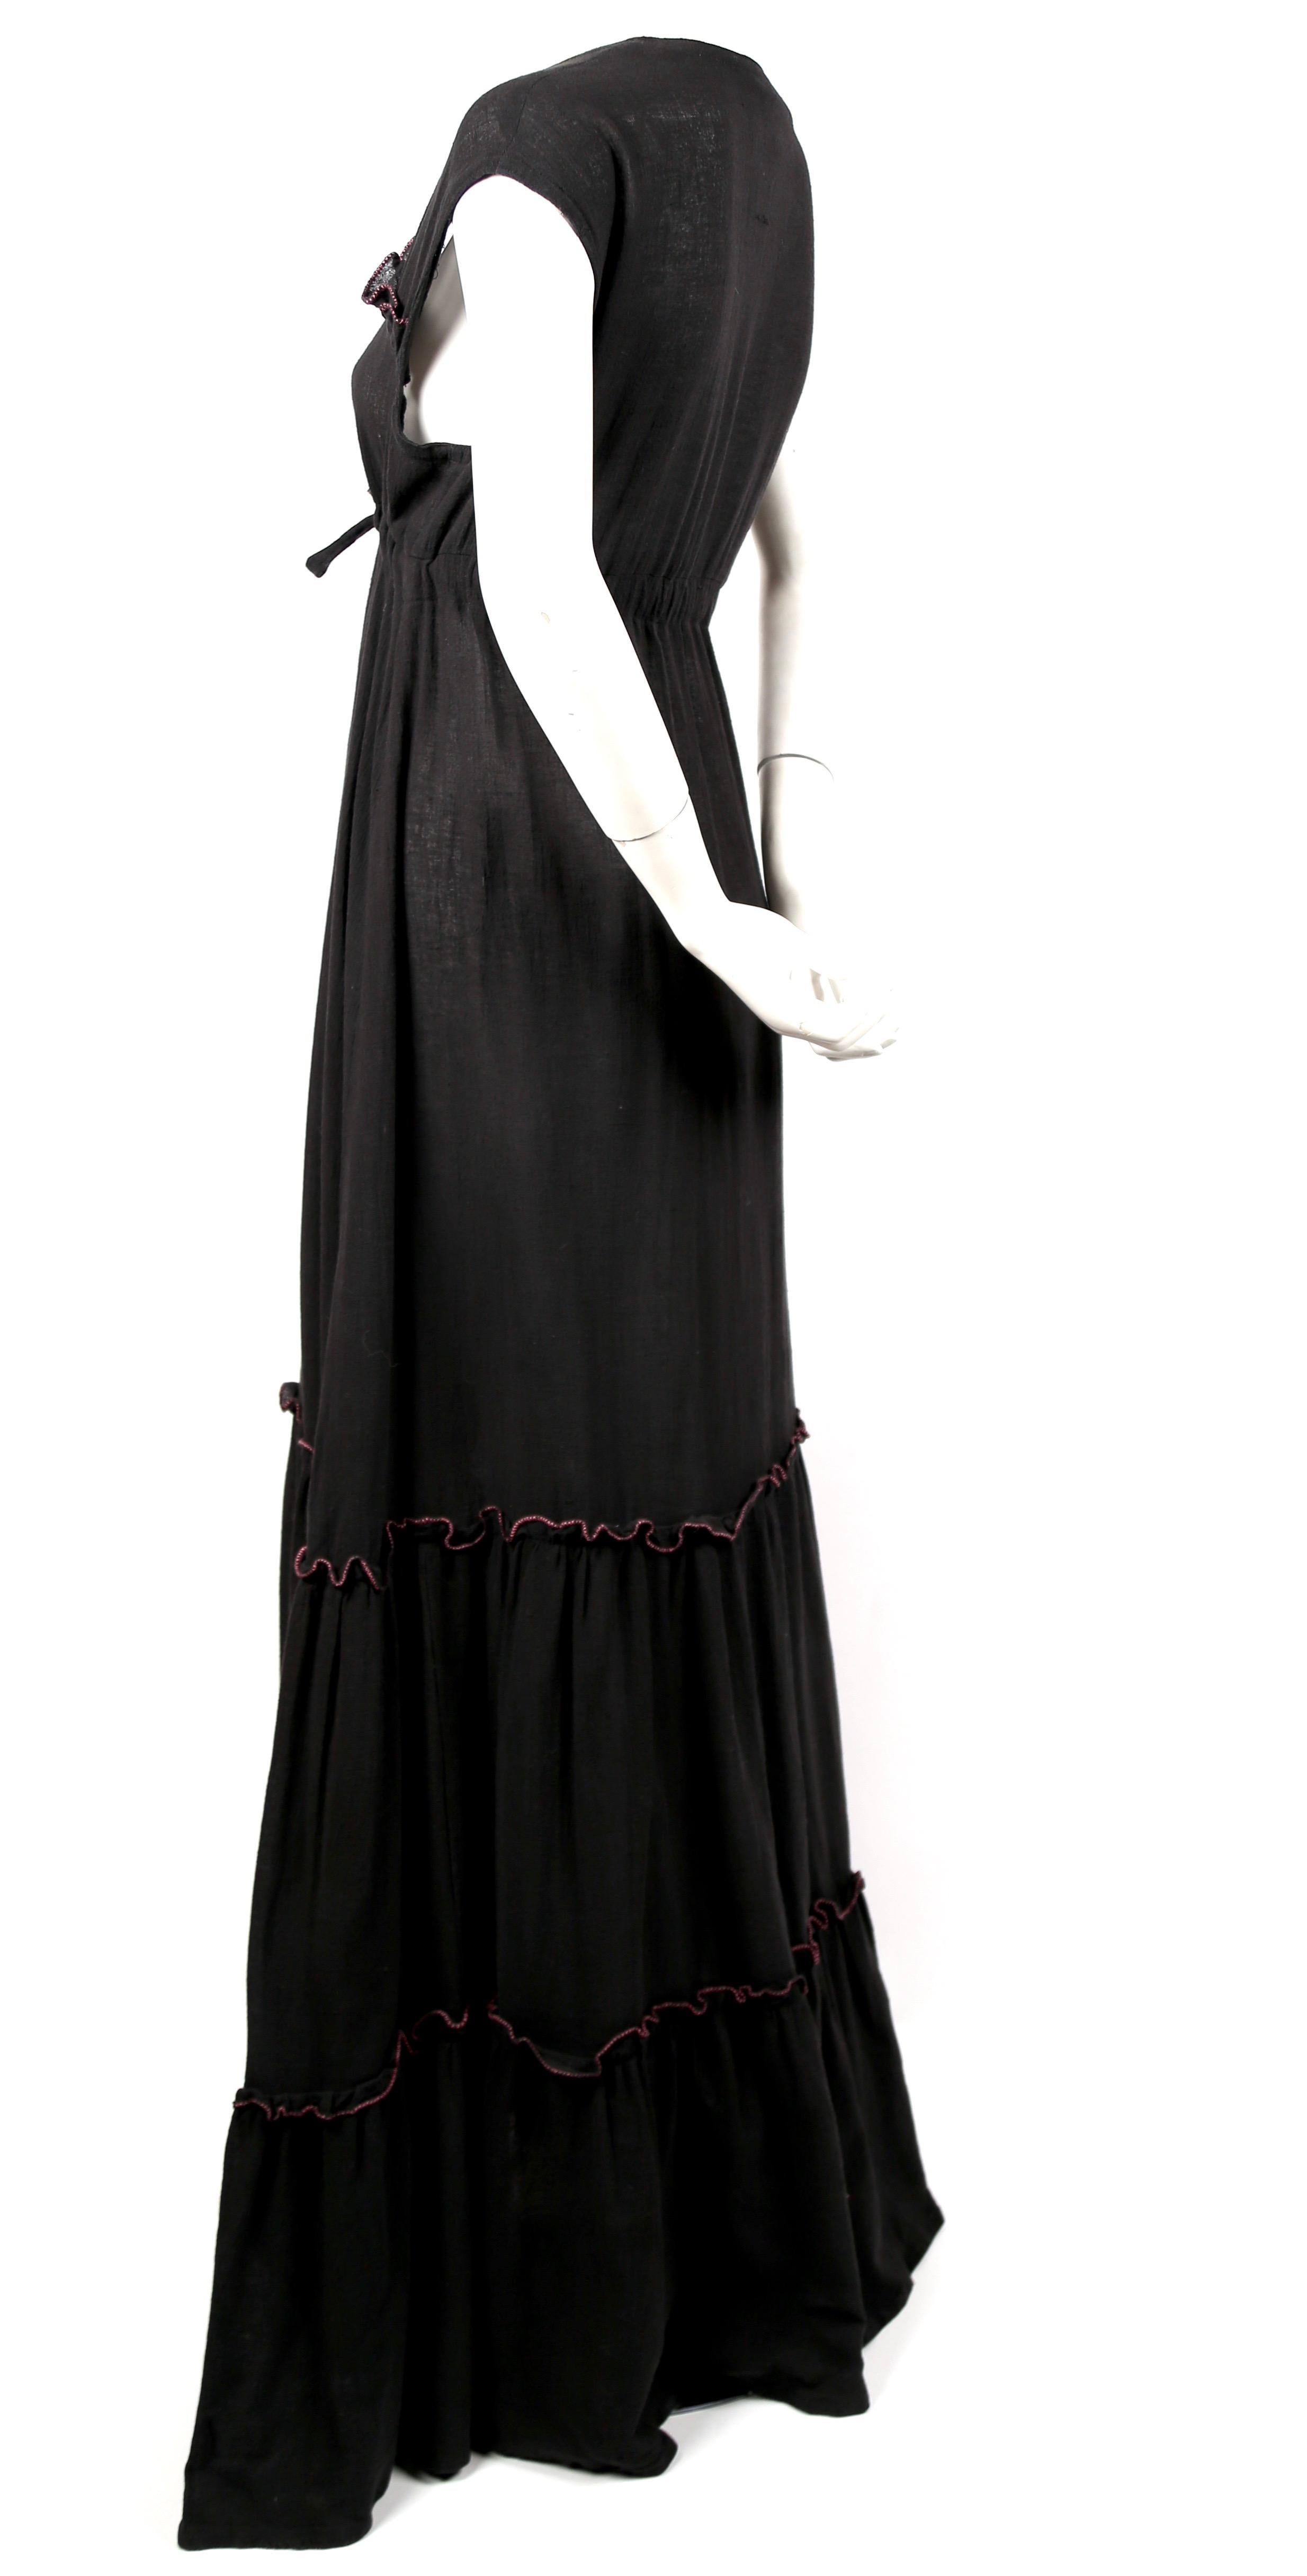 Soft-black, lightweight, cotton gauze maxi dress with pink stitching made by Radley dating to the 1970's. UK size 12. Dress was photographed on a size 2 mannequin and was not clipped. Adjustable empire waist drawstring closure. Approximate length